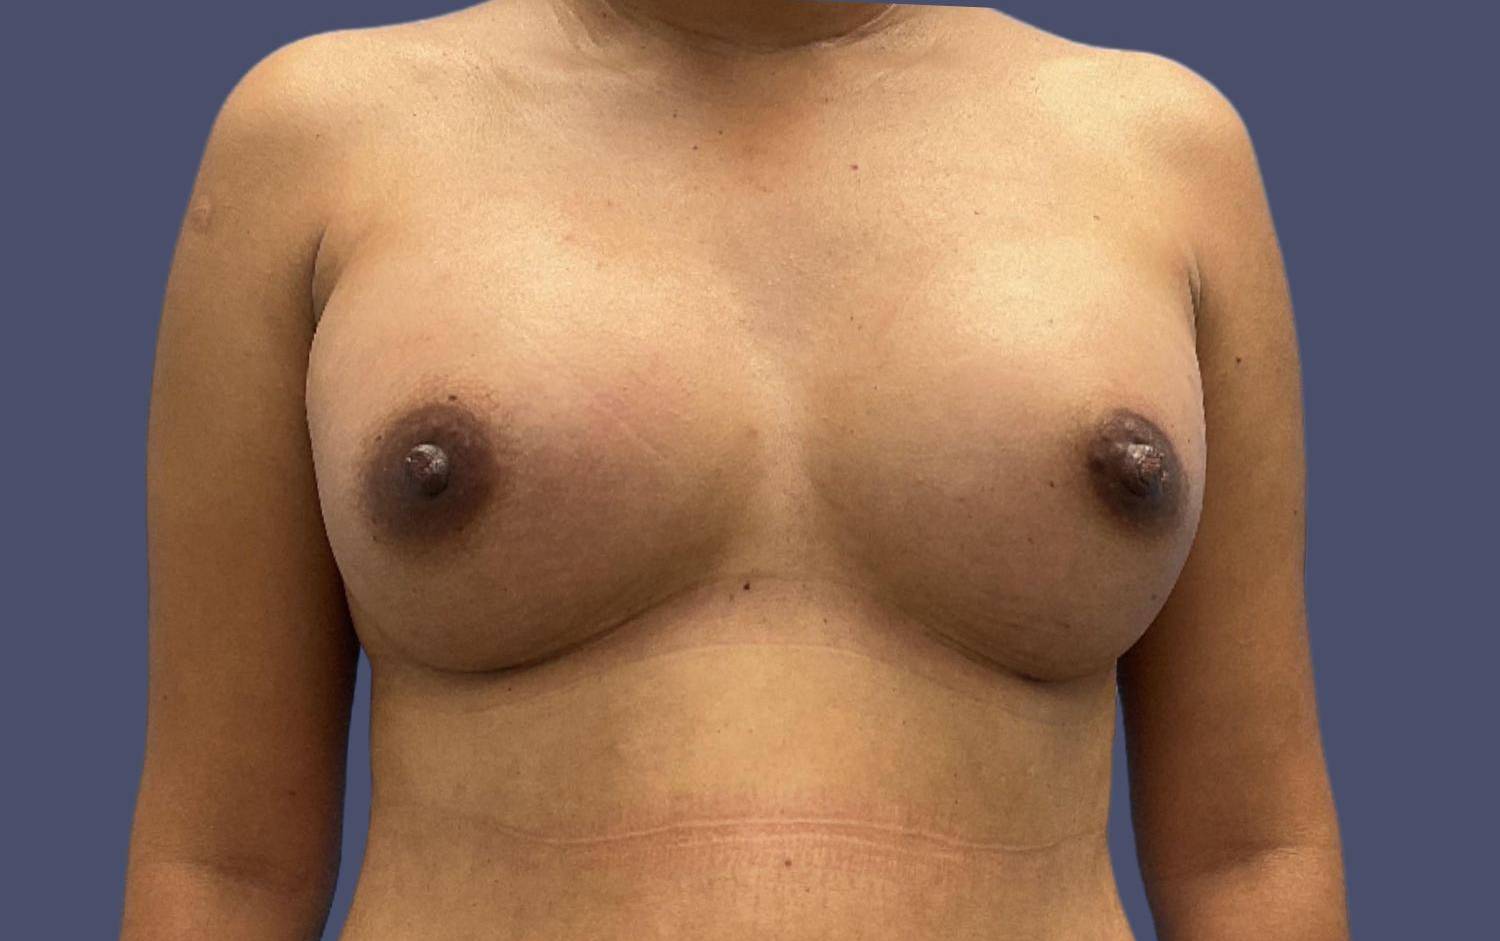 Breast Augmentation 38 After